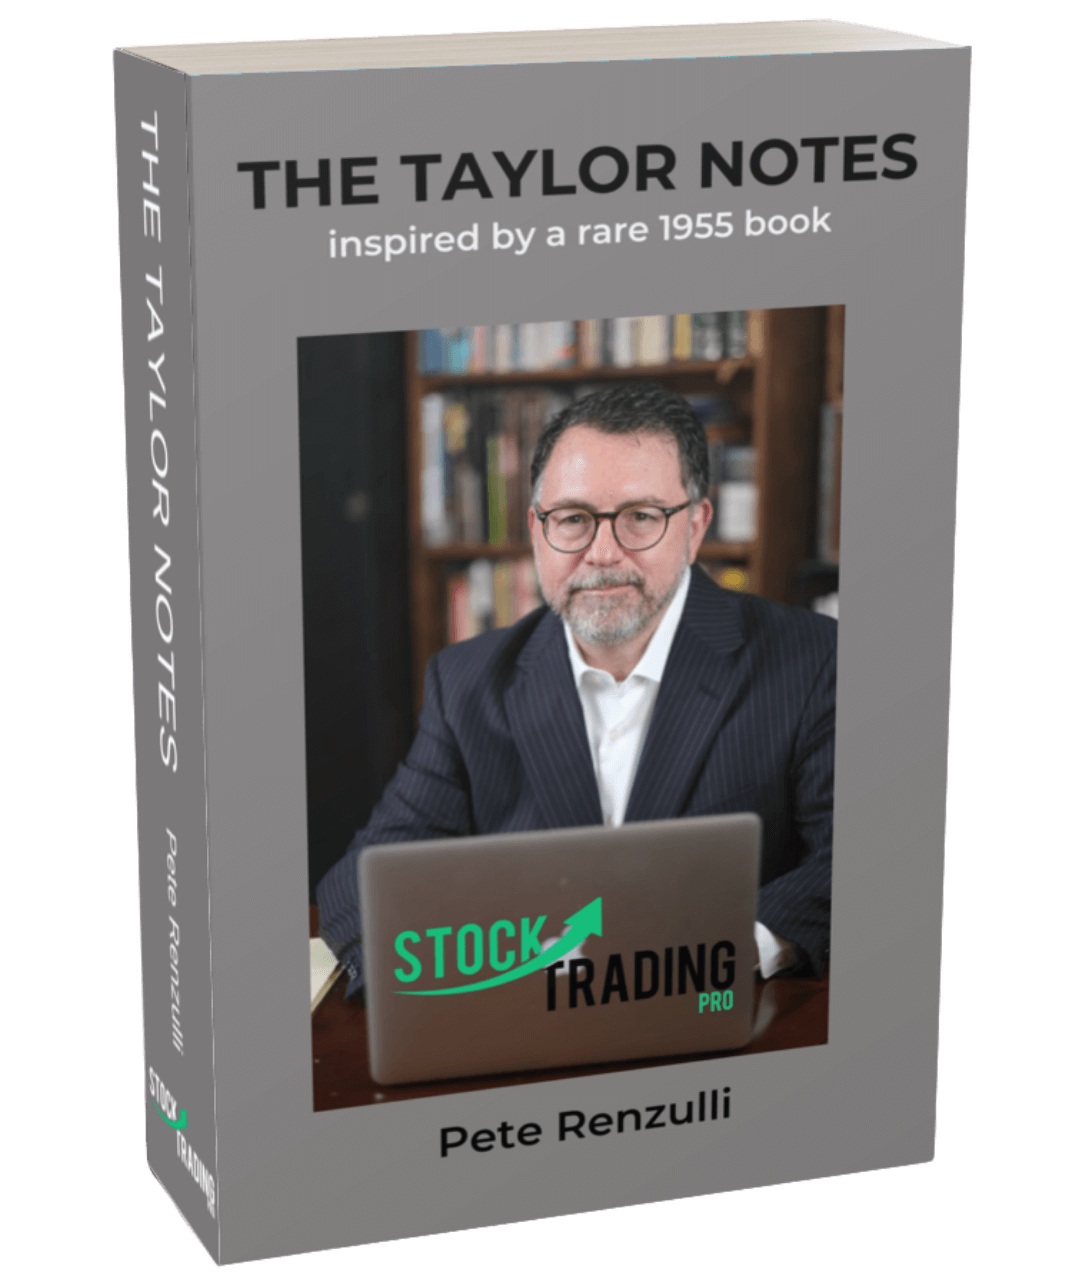 The Taylor Notes